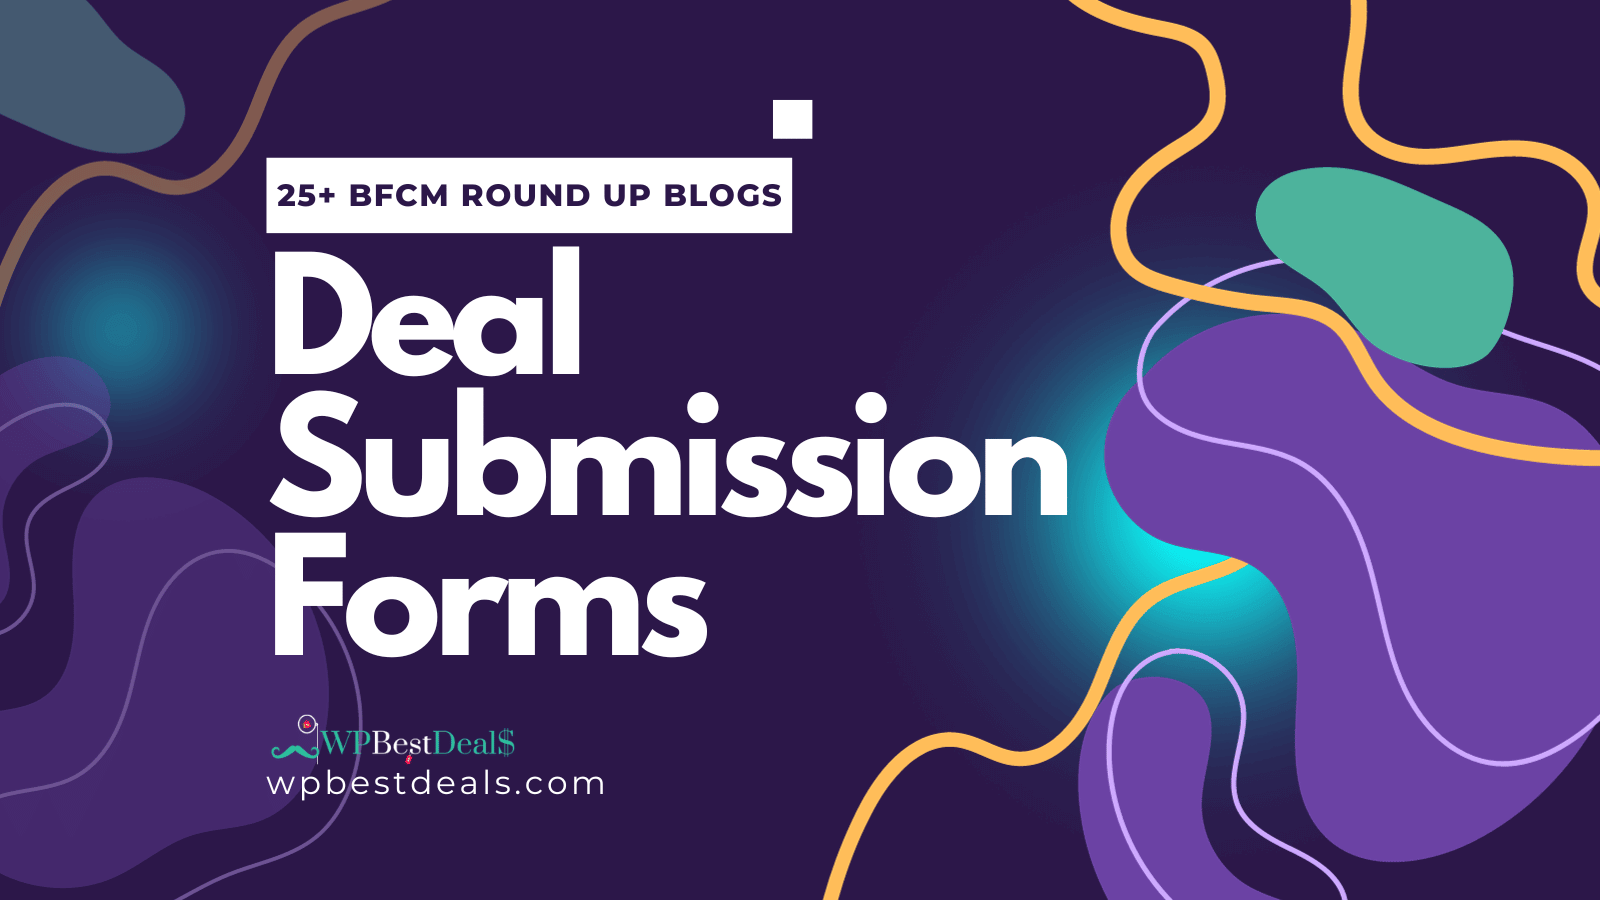 25+ BFCM Round up blogs and BFCM deal submission forms